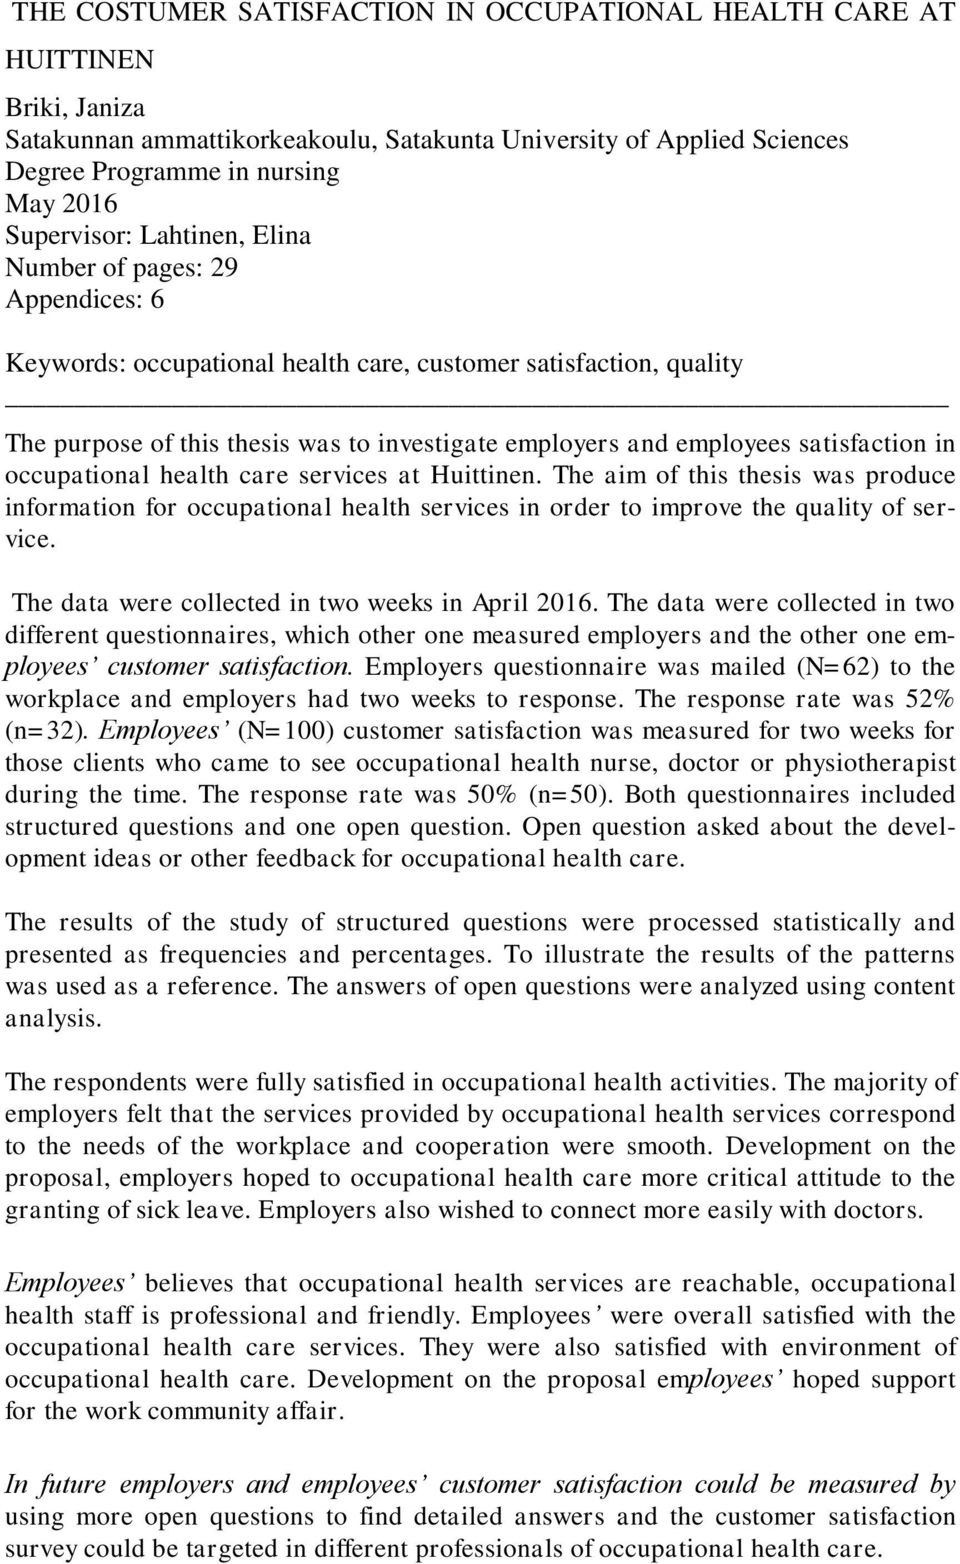 satisfaction in occupational health care services at Huittinen. The aim of this thesis was produce information for occupational health services in order to improve the quality of service.